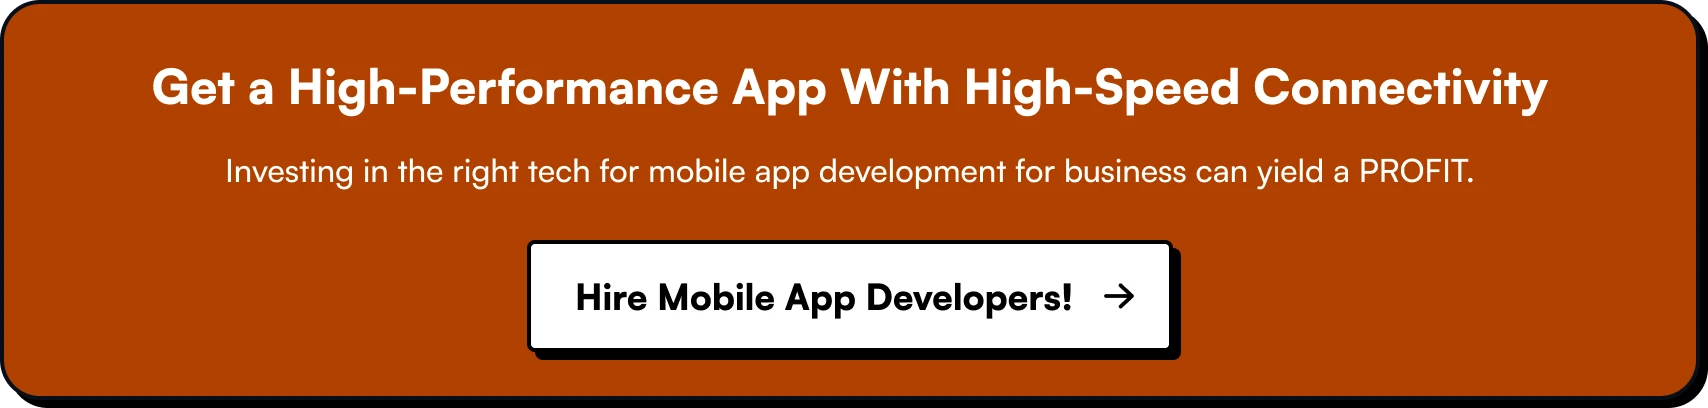 Get a High-Performance App With High-Speed Connectivity